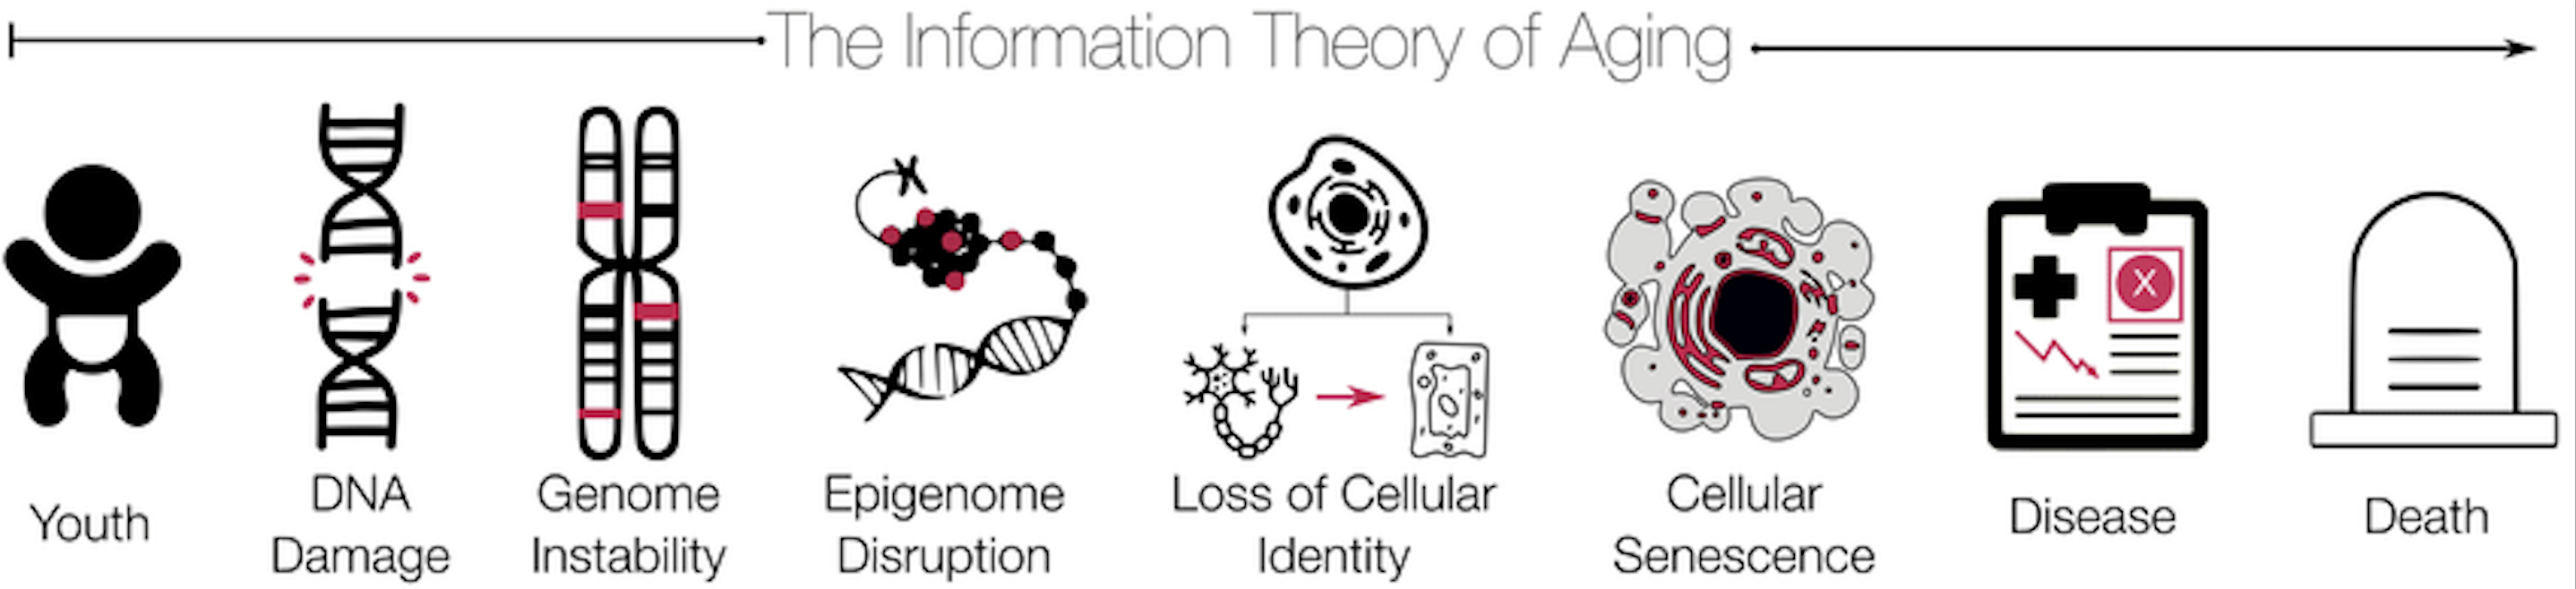 Information Theory of Aging